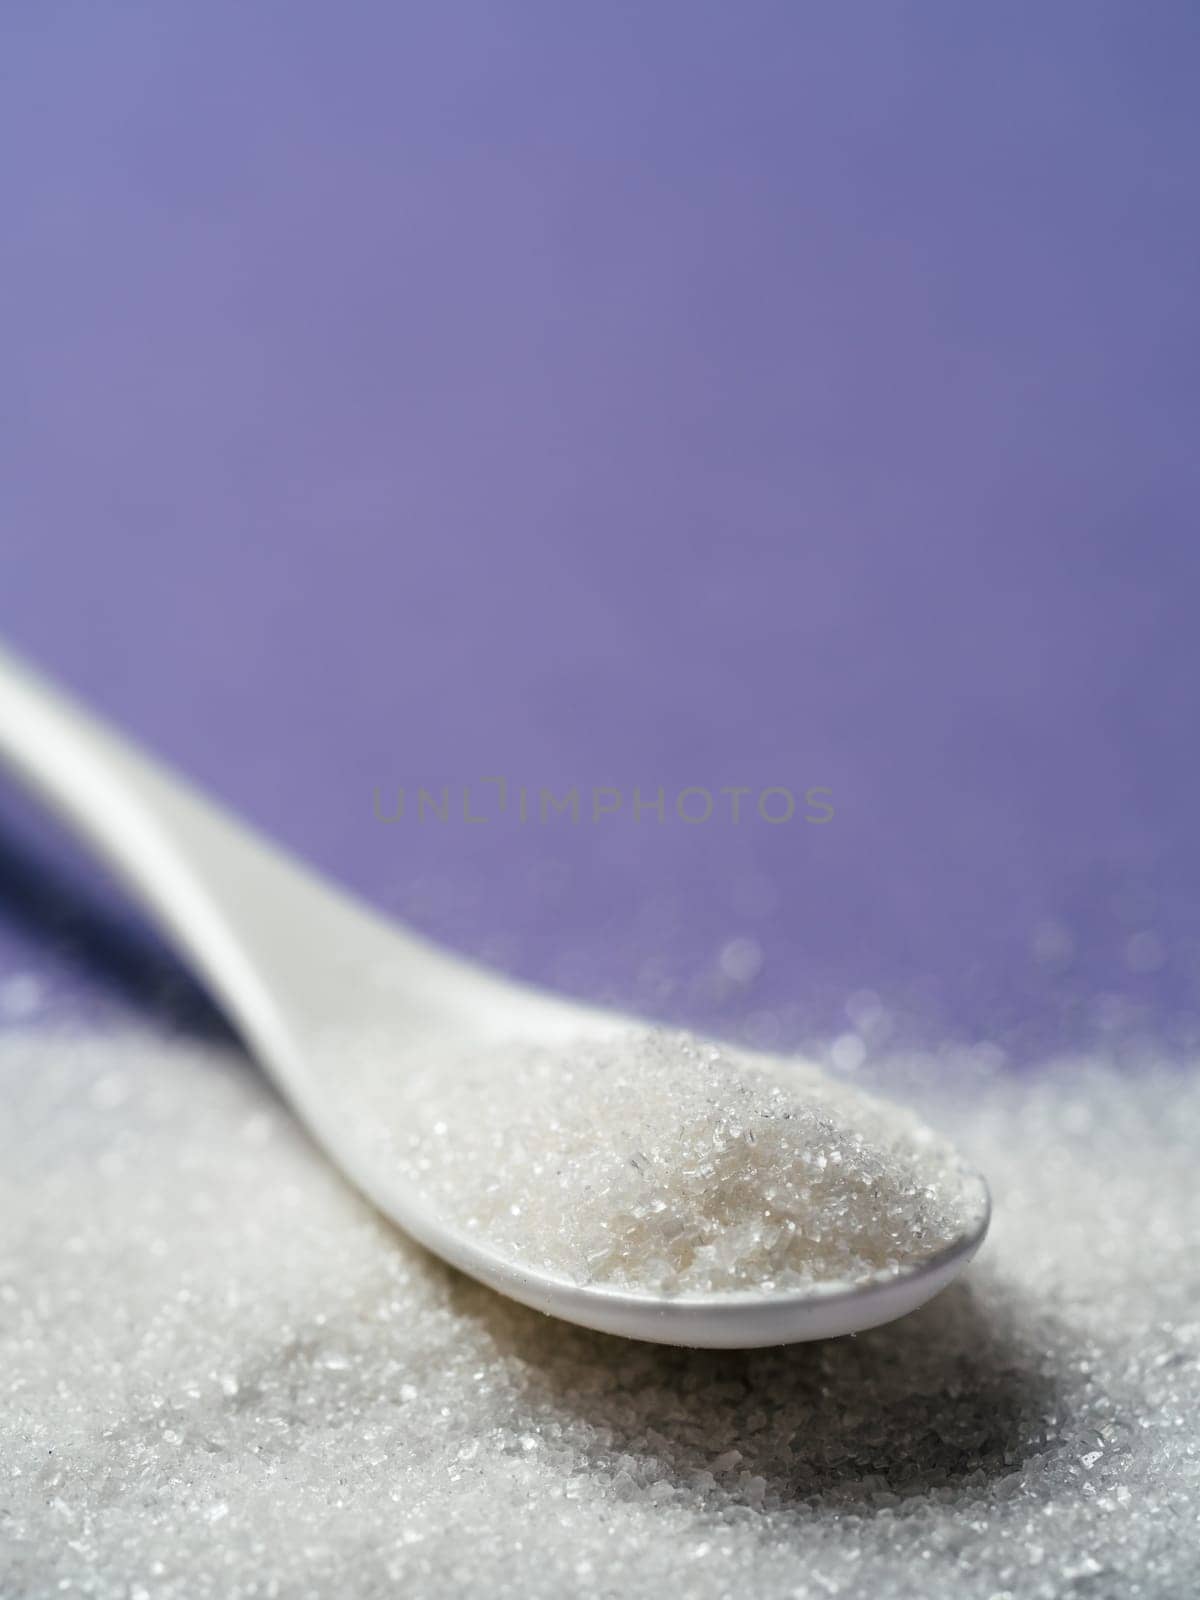 Sugar in white ceramic spoon on lilac background. Spoon with white sugar on violet background, closeup. Shallow DOF. Copy space for text. Vertical.